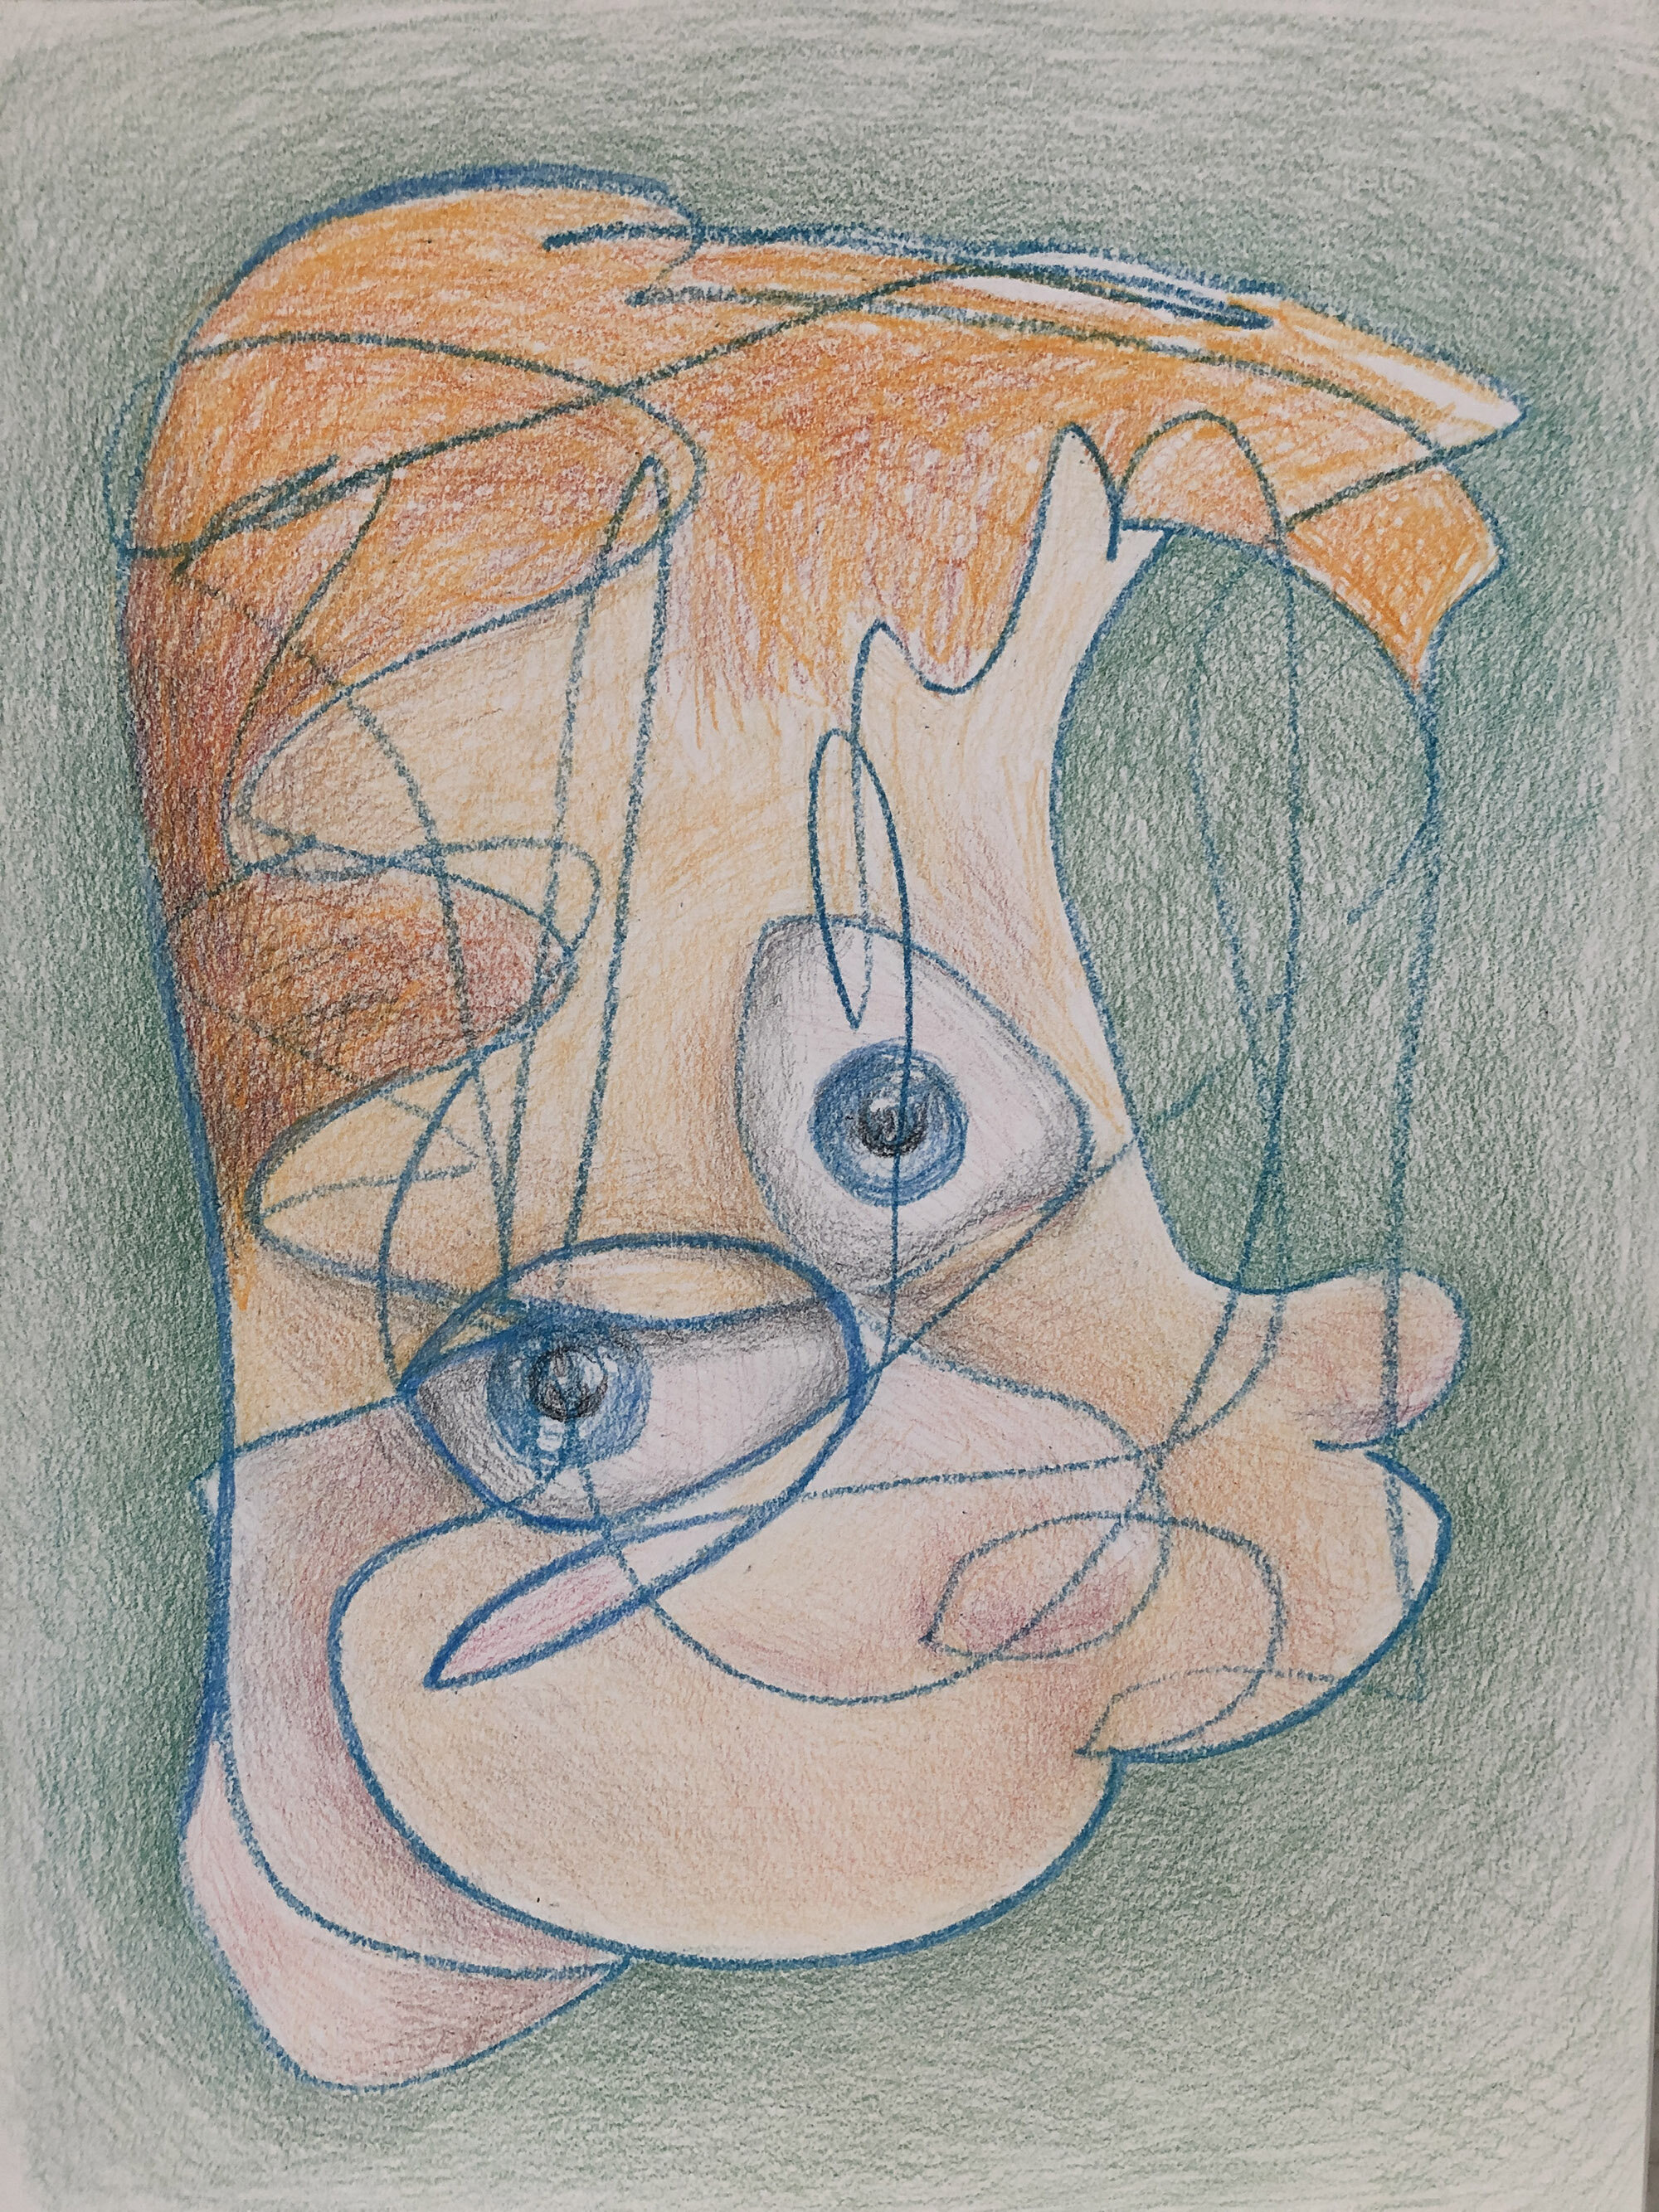 SOLD Boy  9" x12" Colored Pencil on Paper